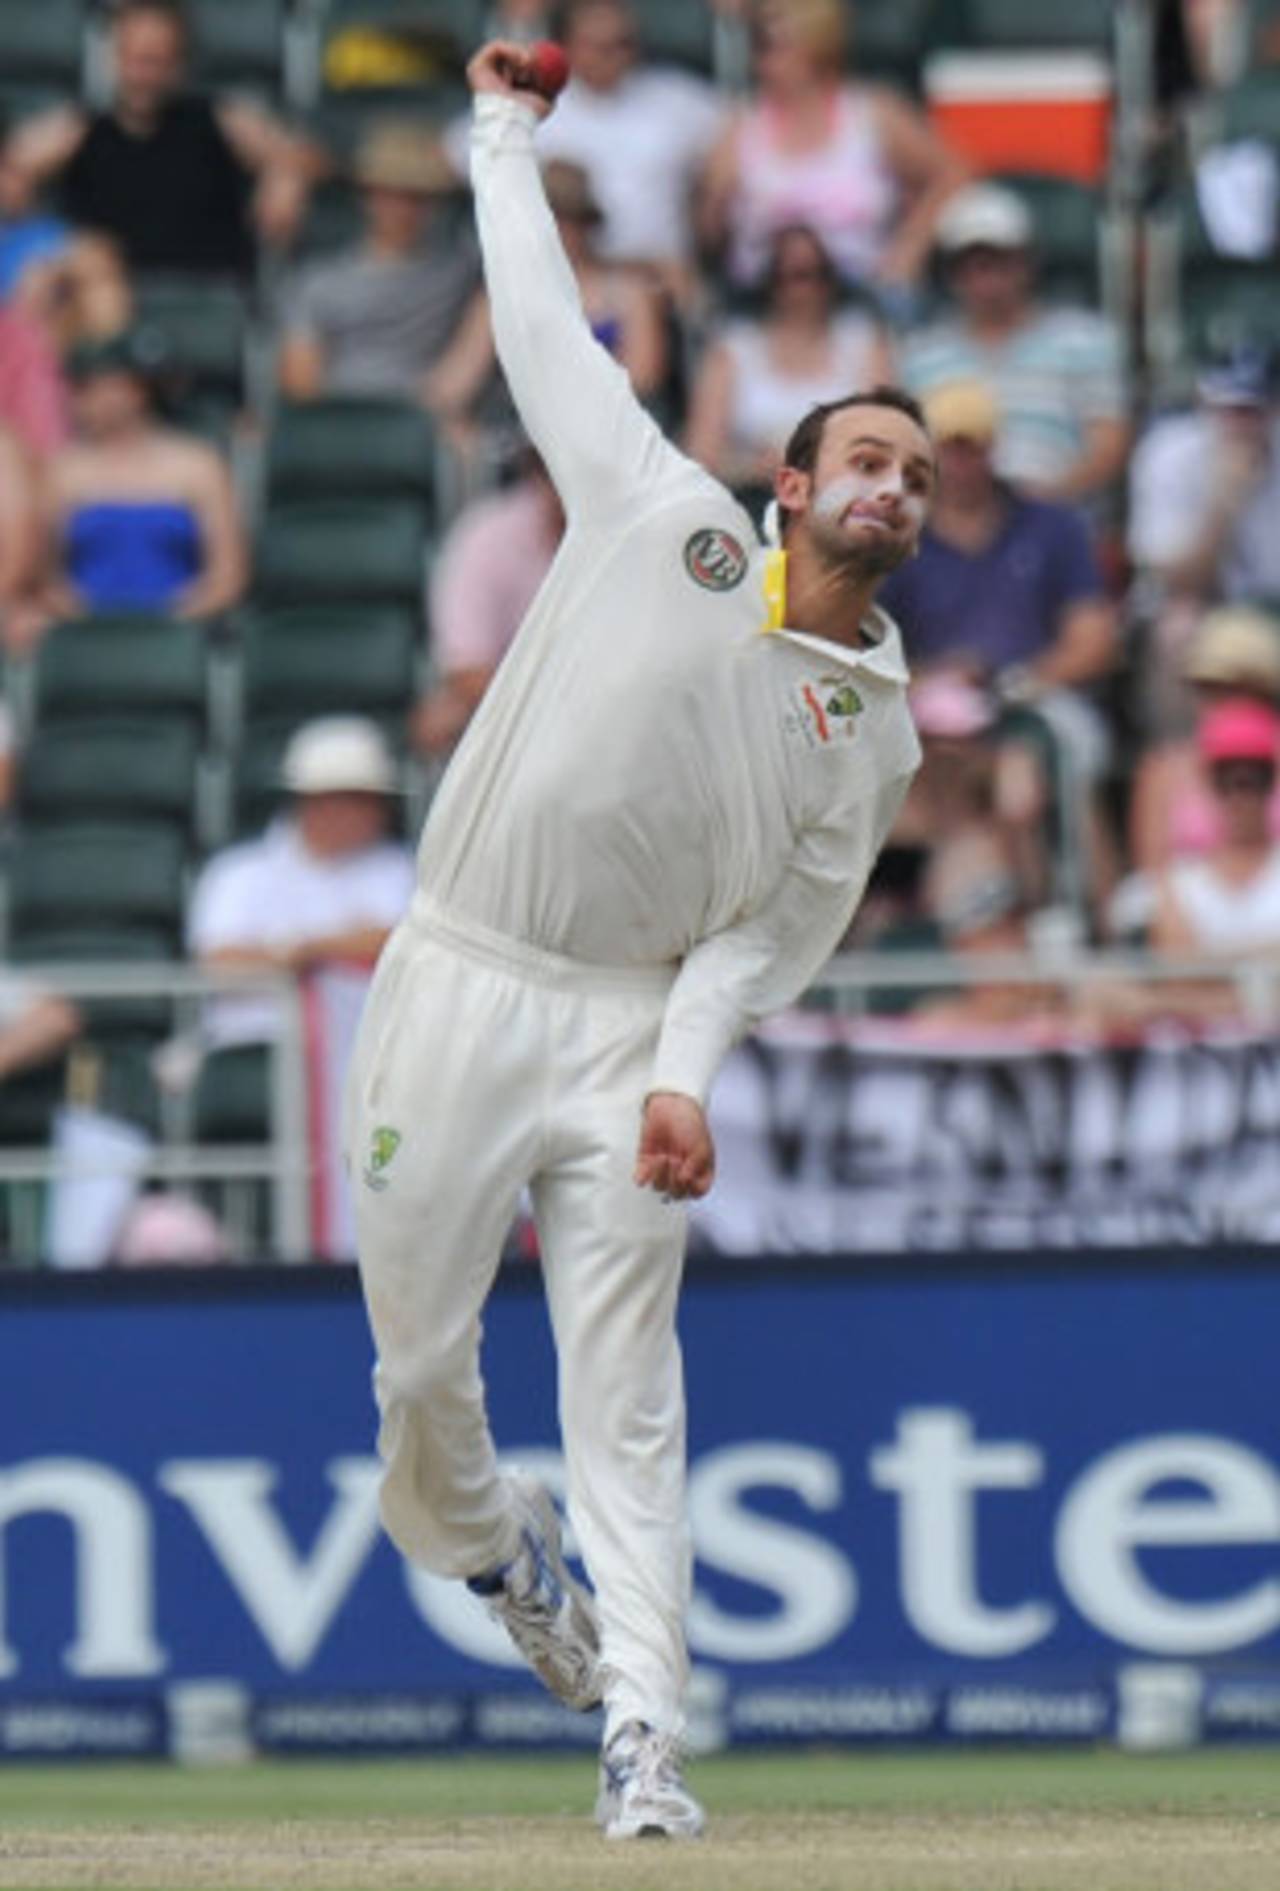 Nathan Lyon in his delivery stride, South Africa v Australia, 2nd Test, Johannesburg, 3rd day, November 19, 2011